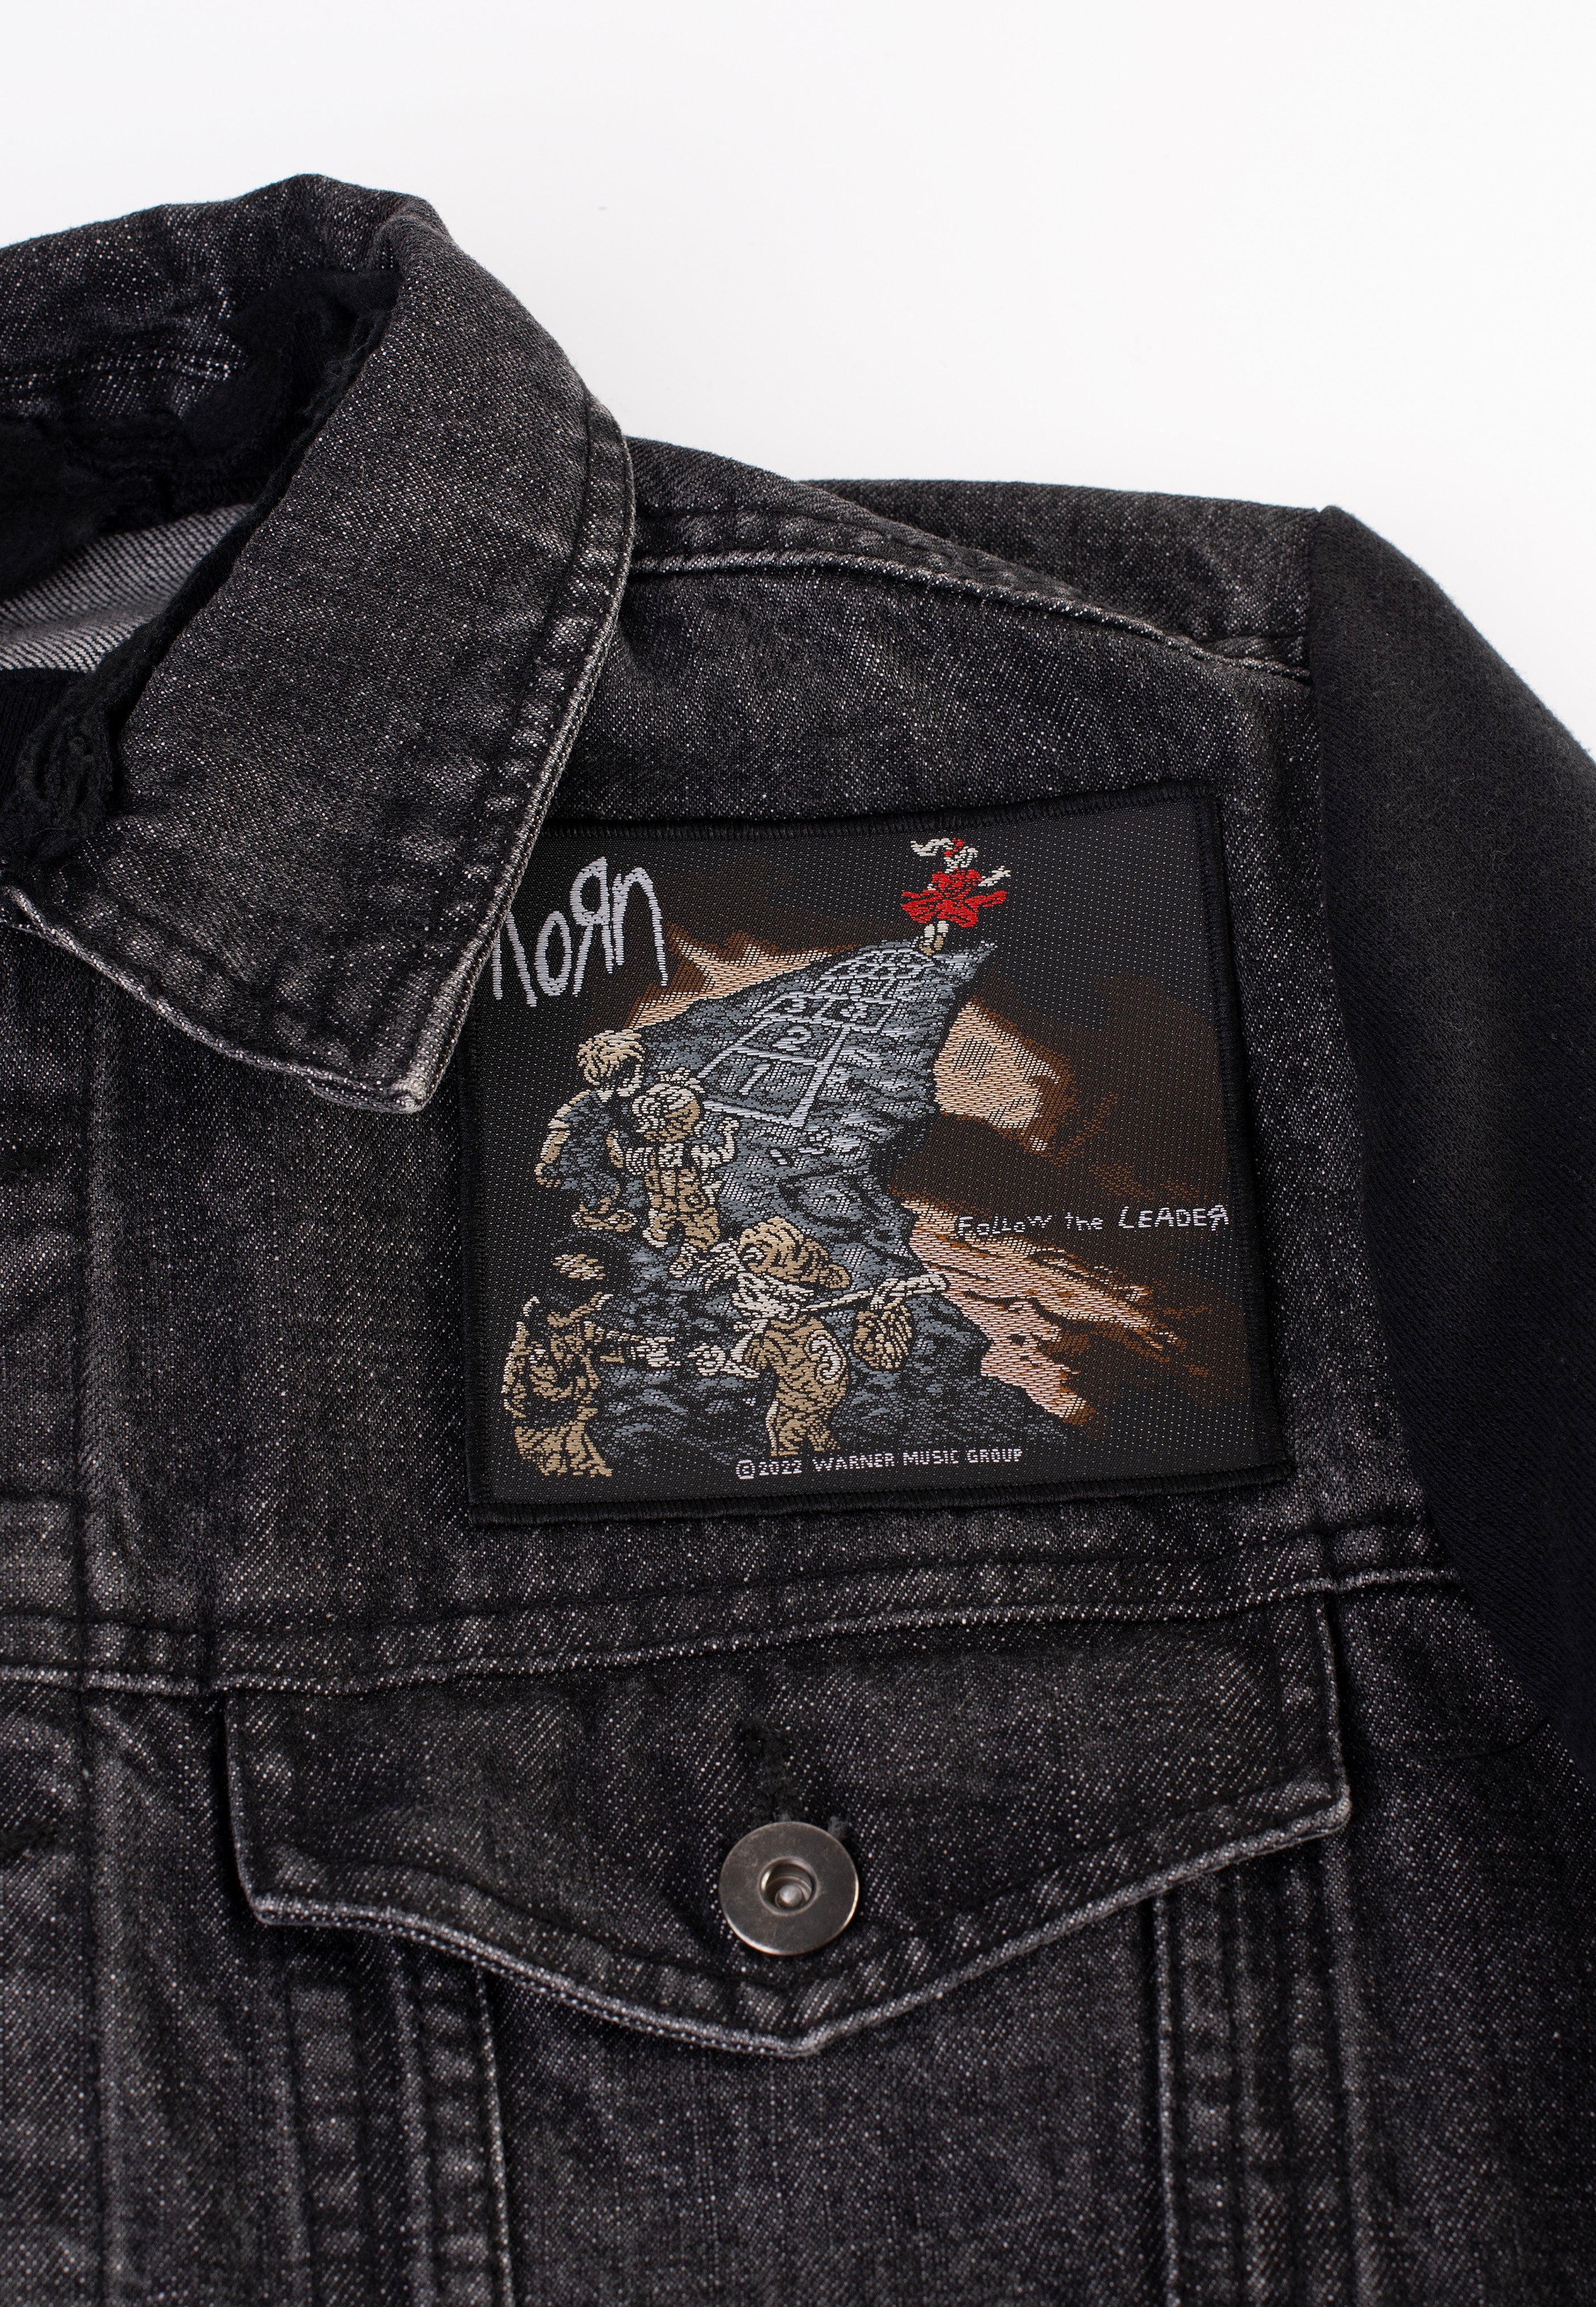 Korn - Follow The Leader - Patch